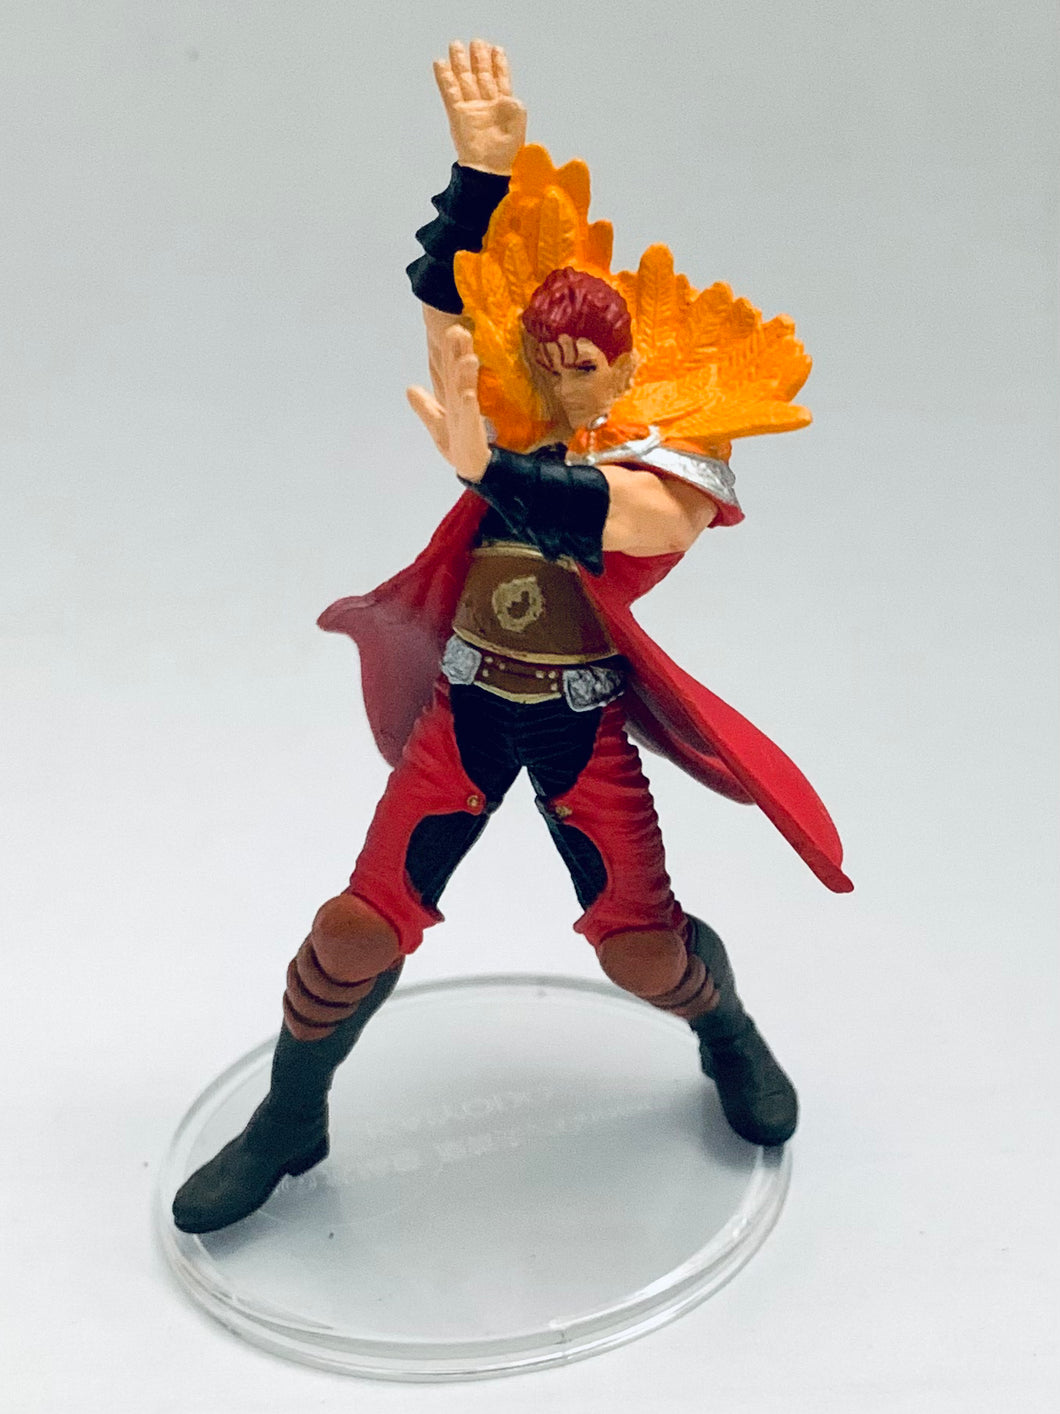 Hokuto no Ken - Shuren of the Flames - Fist of the North Star All-Star Retsuden Capsule Figure Collection Part 4 - Advent! End of the Century Conqueror